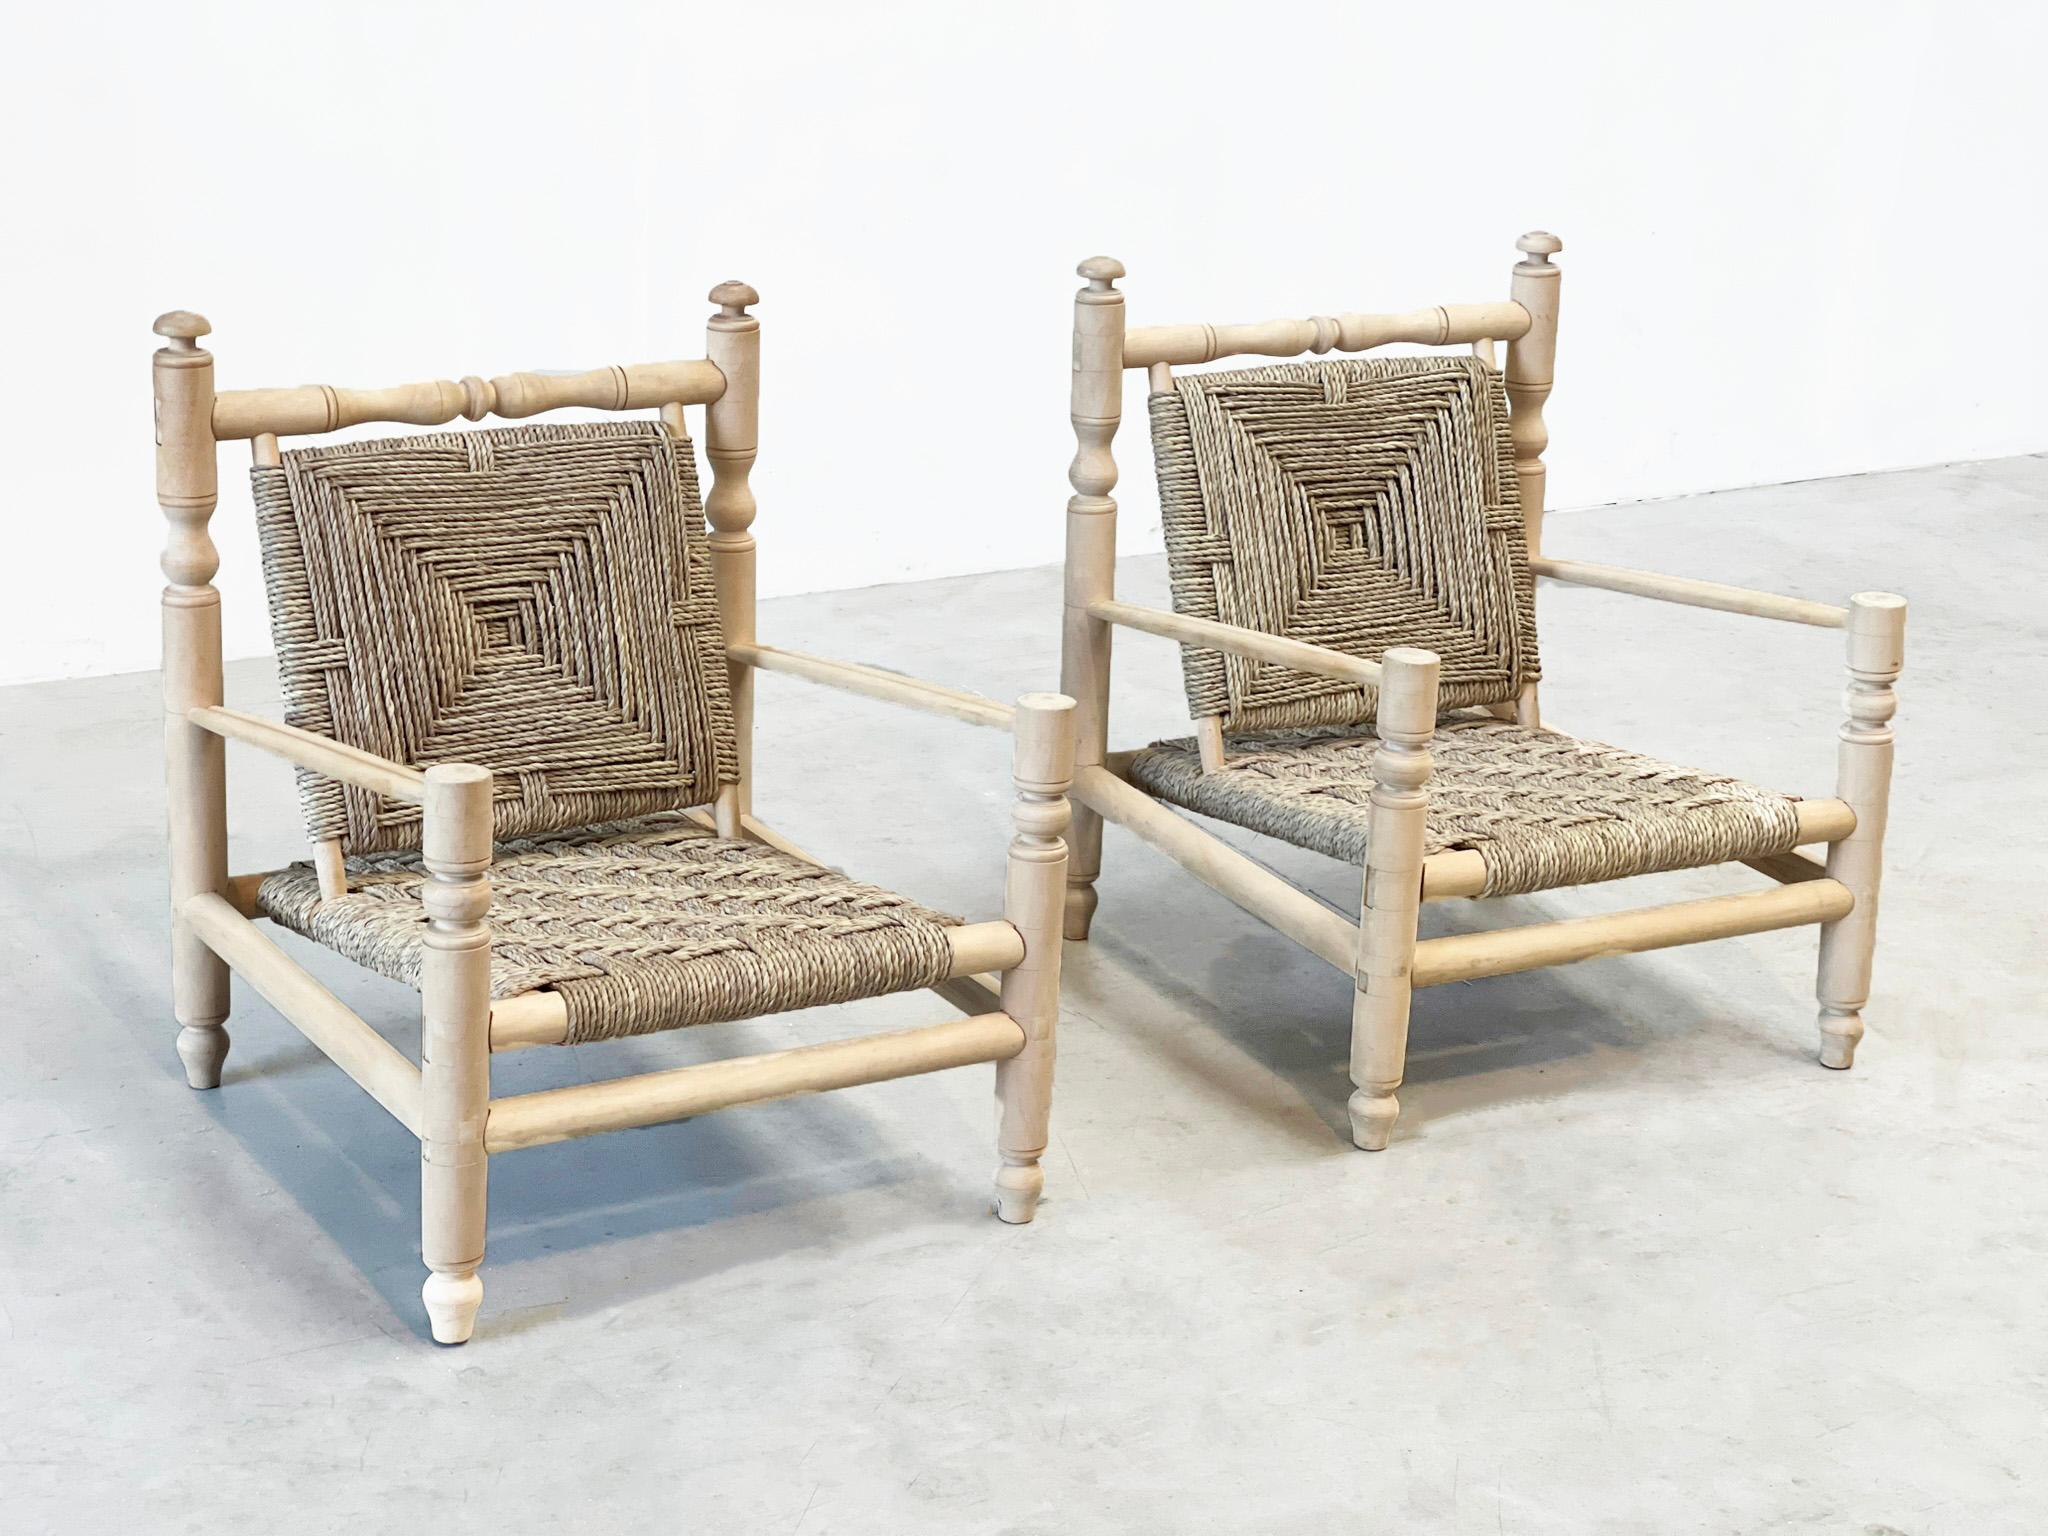 Late 20th Century Lounge chairs by Adrien Audoux & Frida Minet